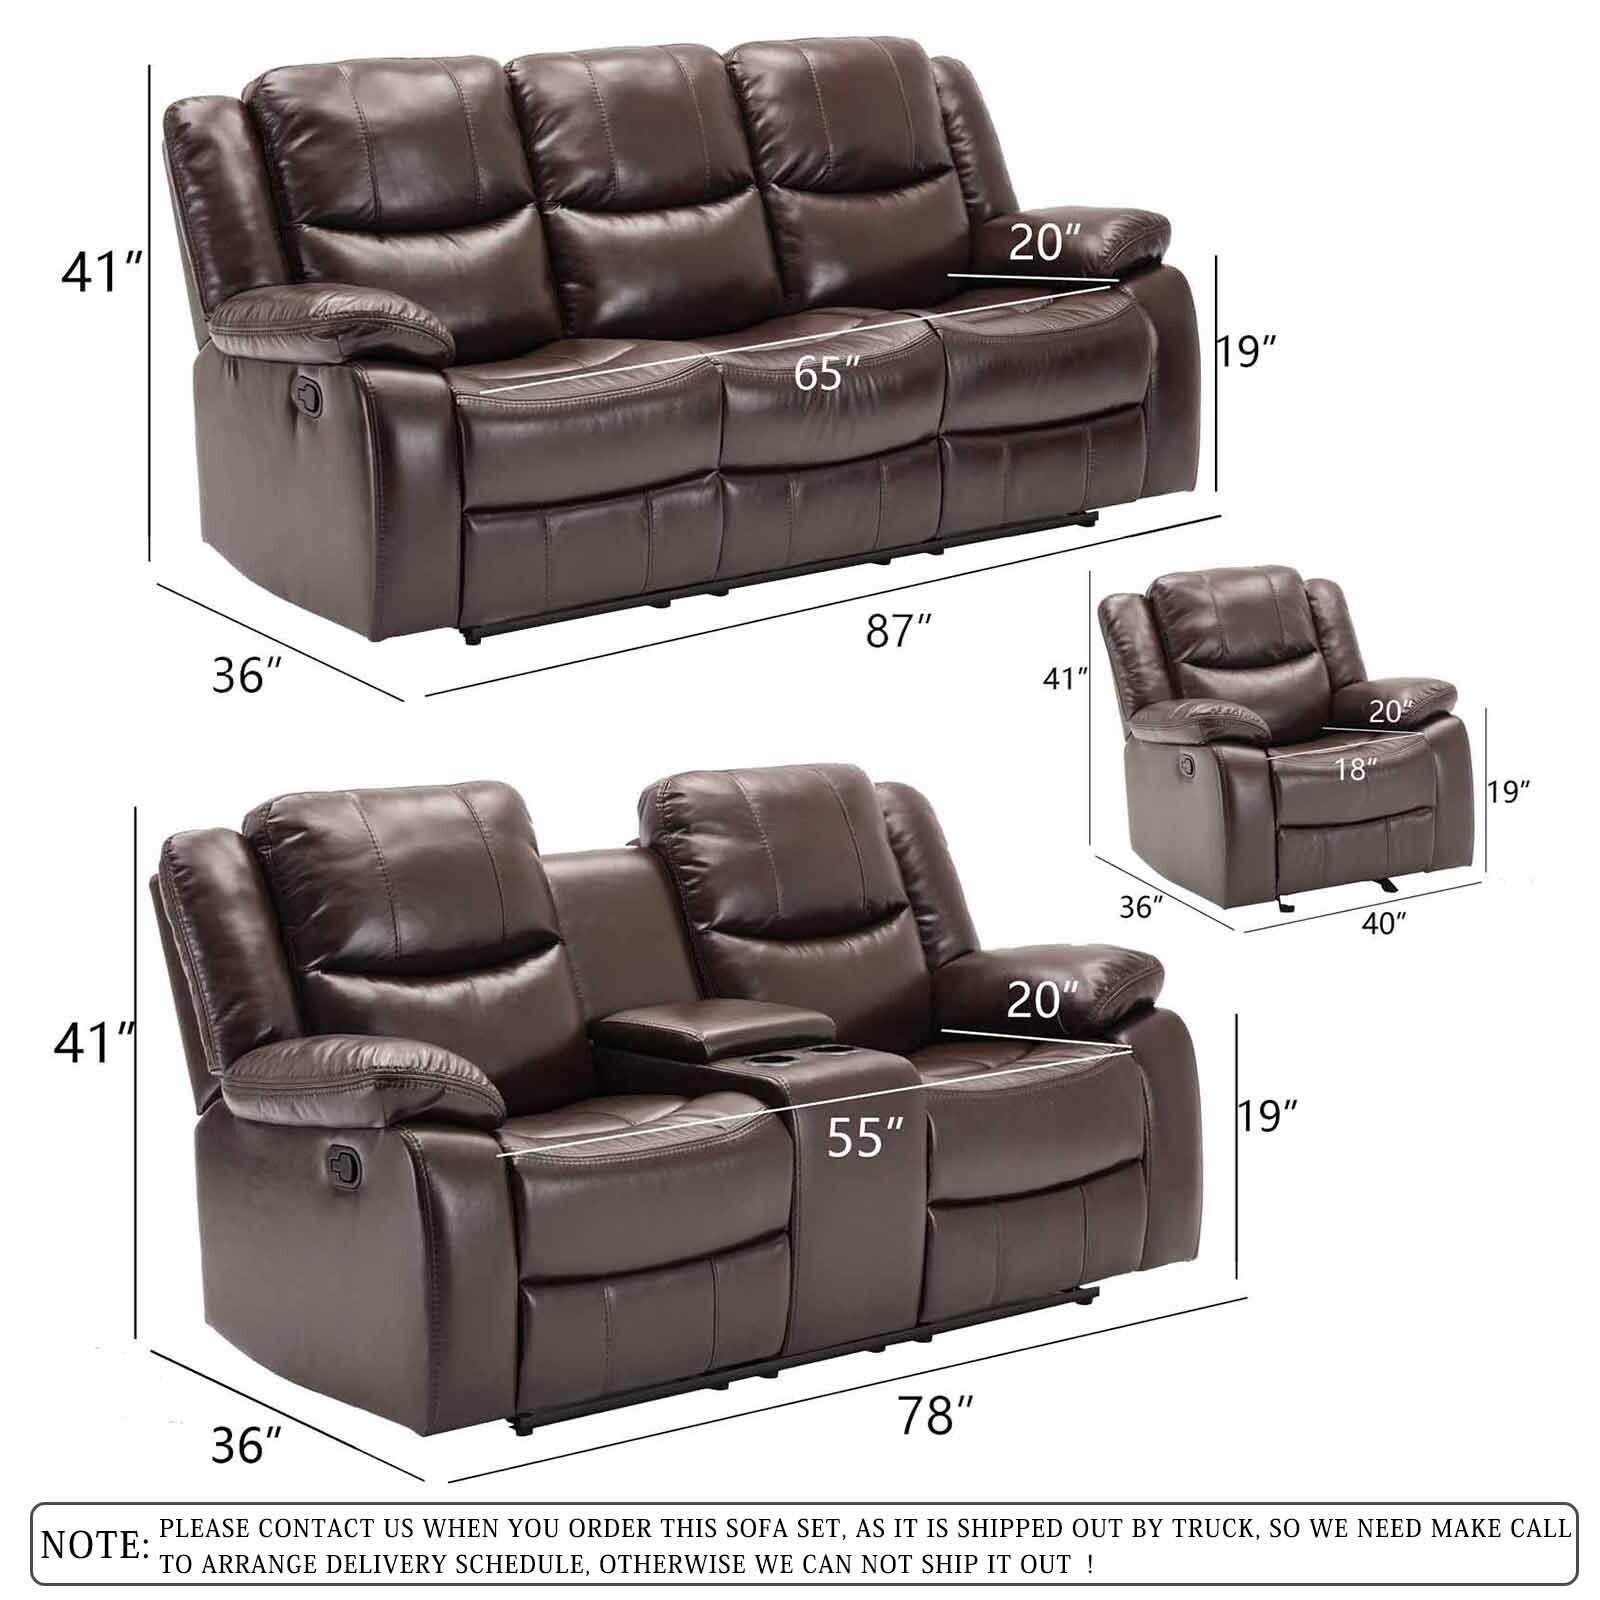 https://ak1.ostkcdn.com/images/products/is/images/direct/95ea22d064b89e859cc79e351491295fd63d9cac/3-Pieces-Sectional-Sofa-Set-Manual-Recliners-with-Cup-Holders-PU-Leather-Overstuffed-Set-Brown.jpg